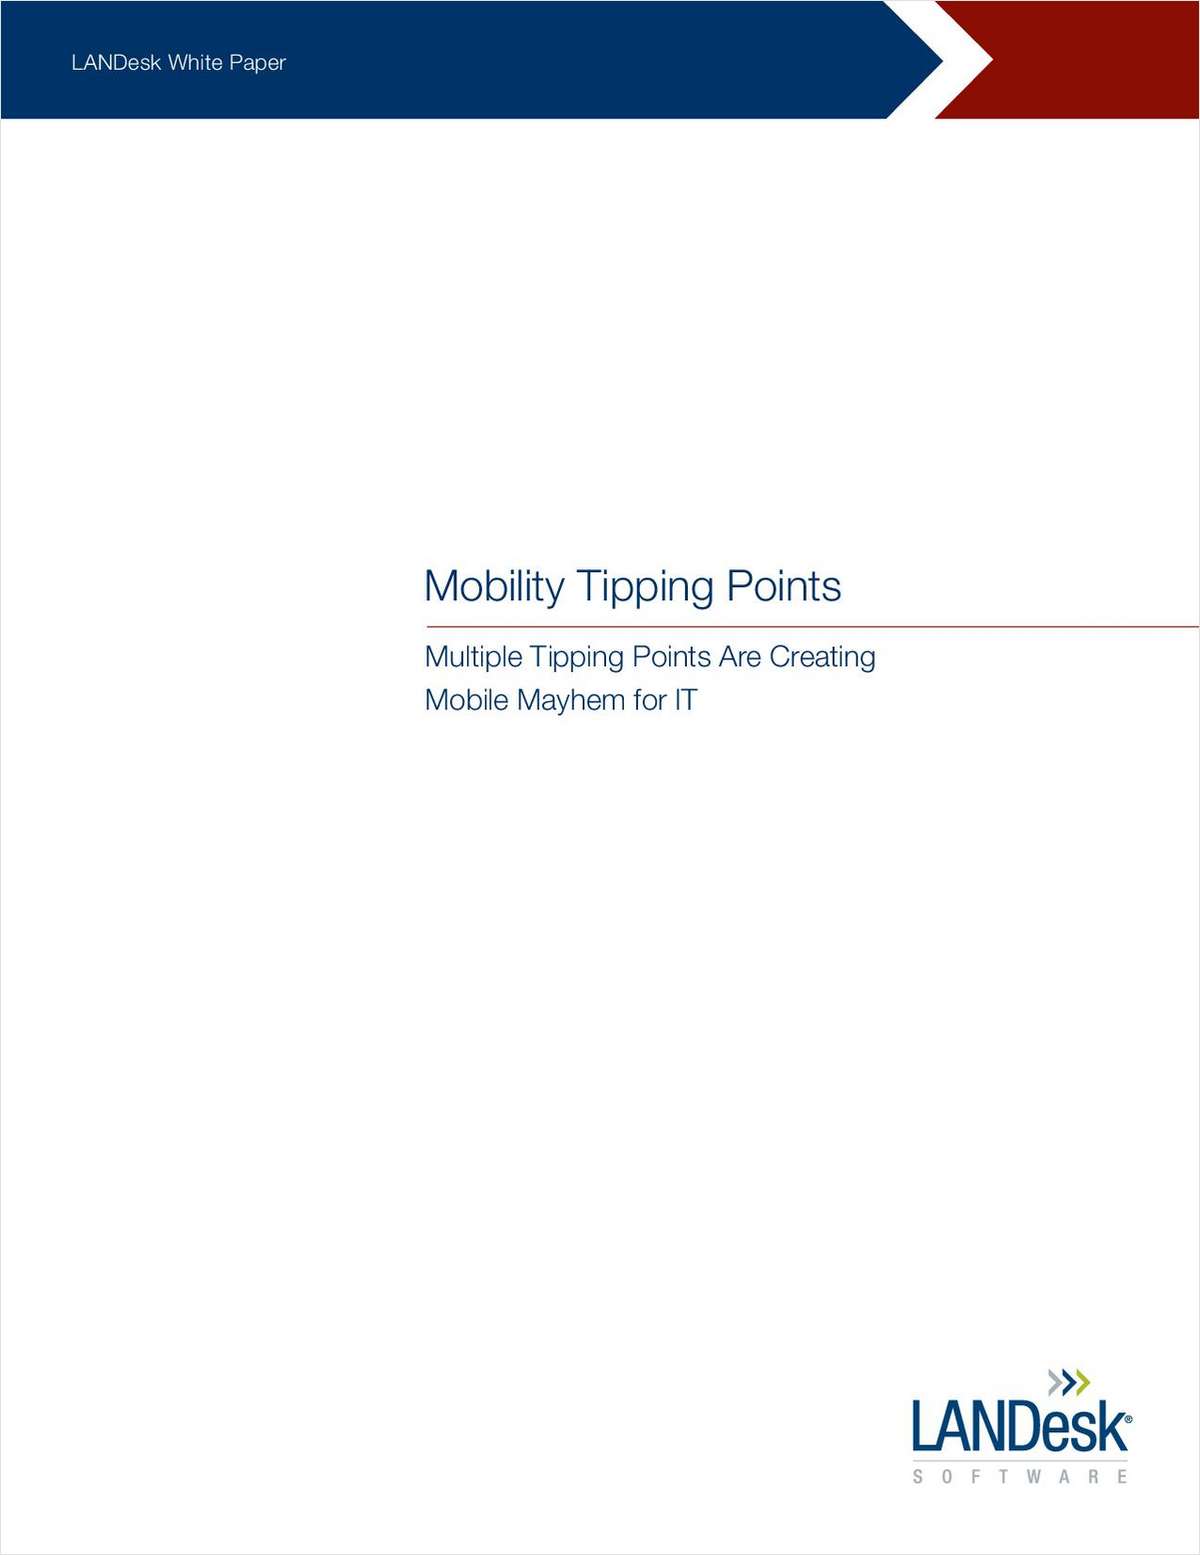 Mobility Tipping Points